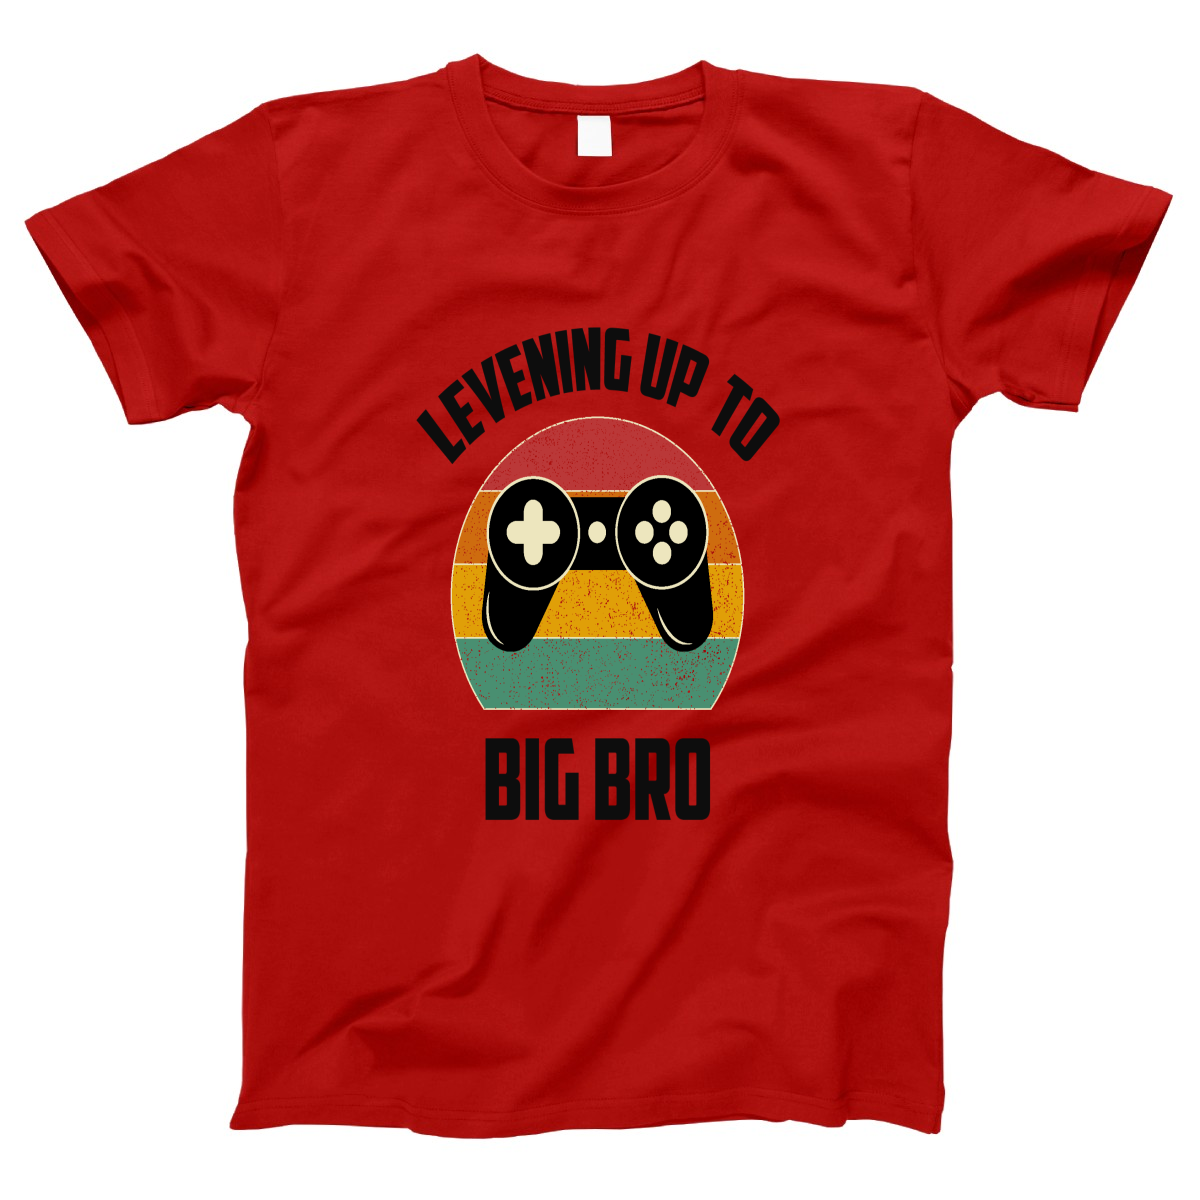 Leveling Up To Big Bro-2 Women's T-shirt | Red